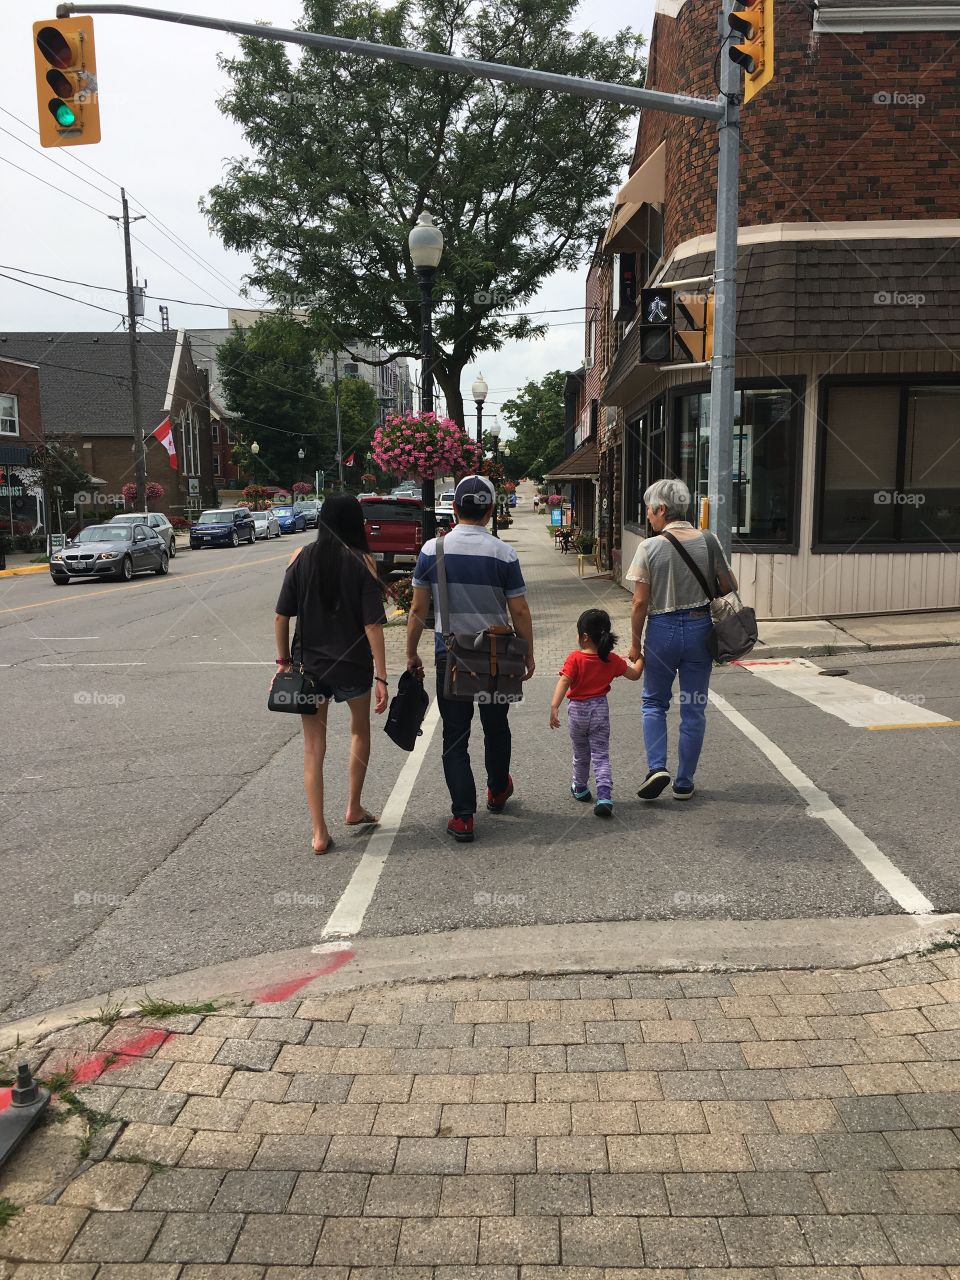 A family of four crossing a street in a town. 